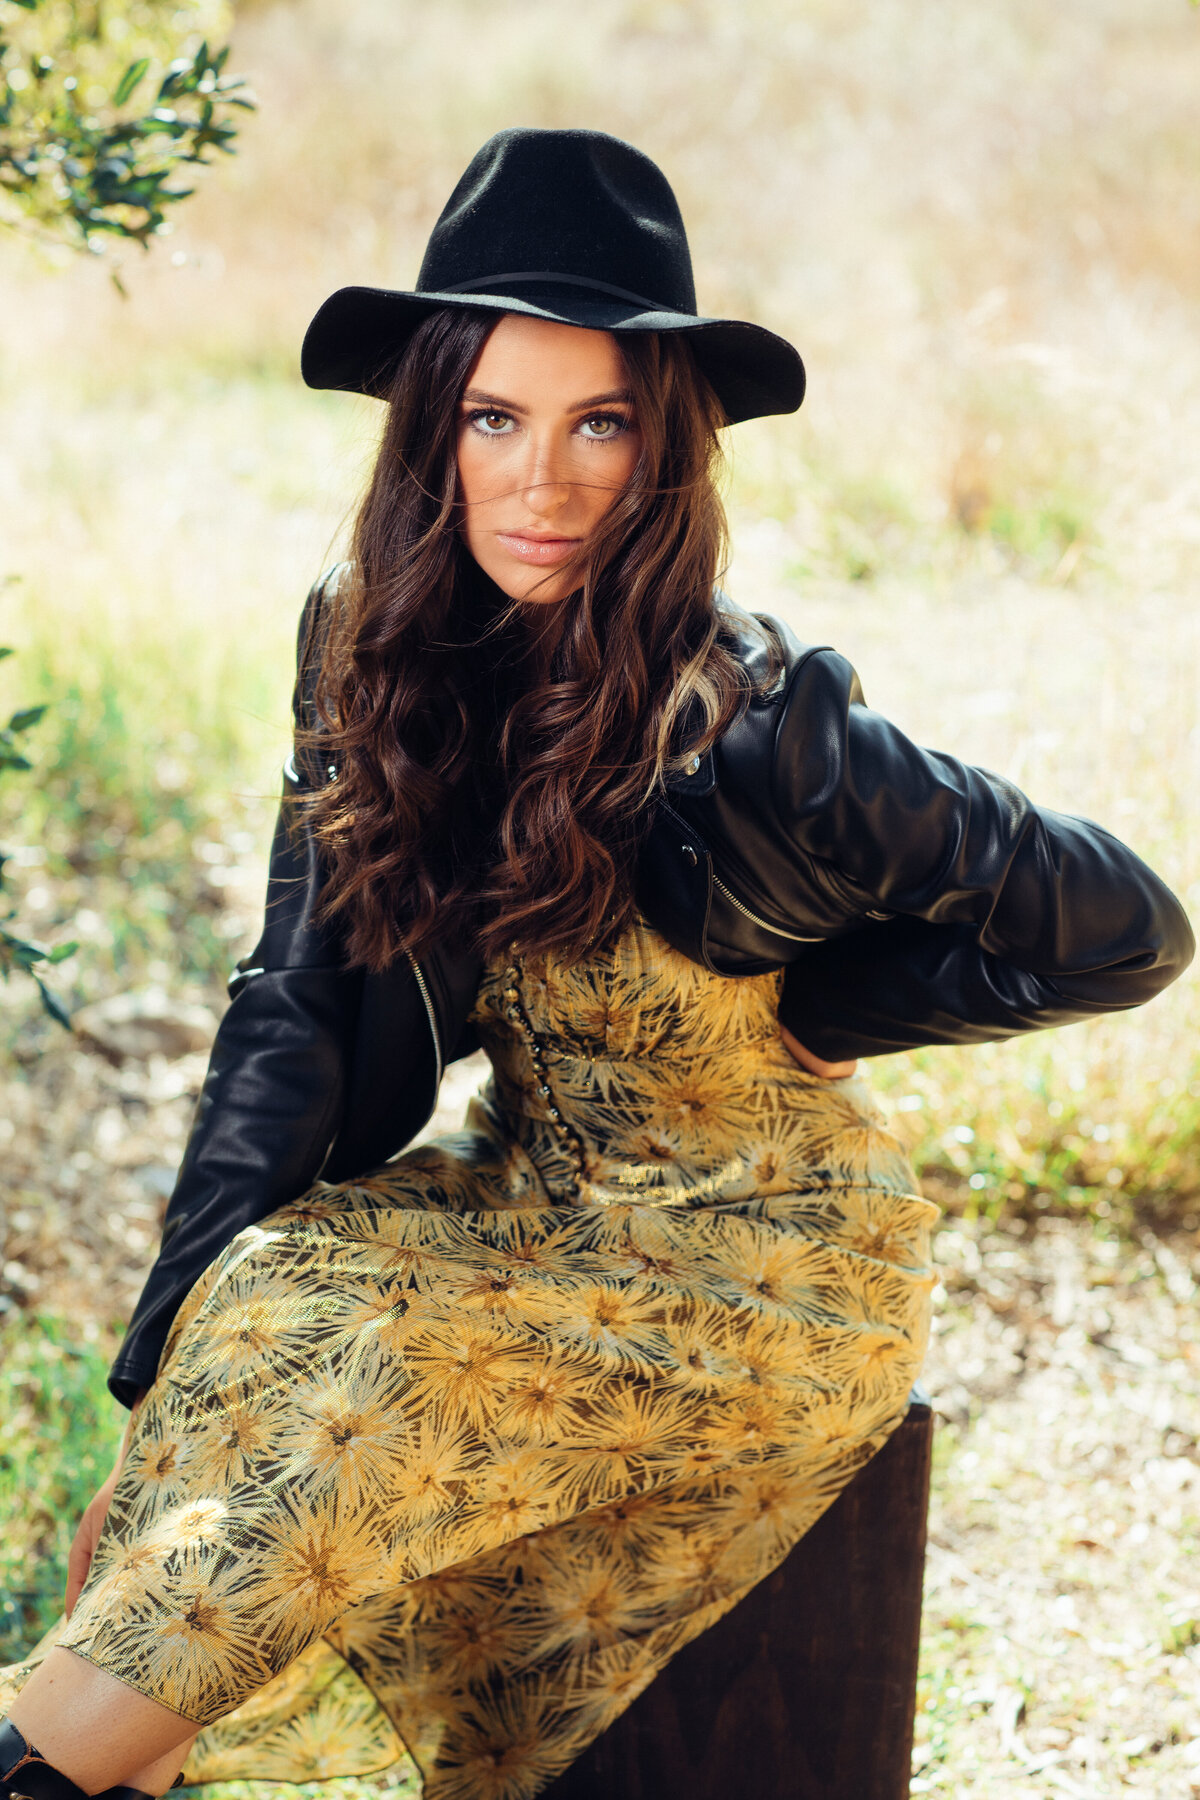 Portrait Photo Of Young Woman In Outer Black Leather jacket And Inner Yellow Dress Los Angeles